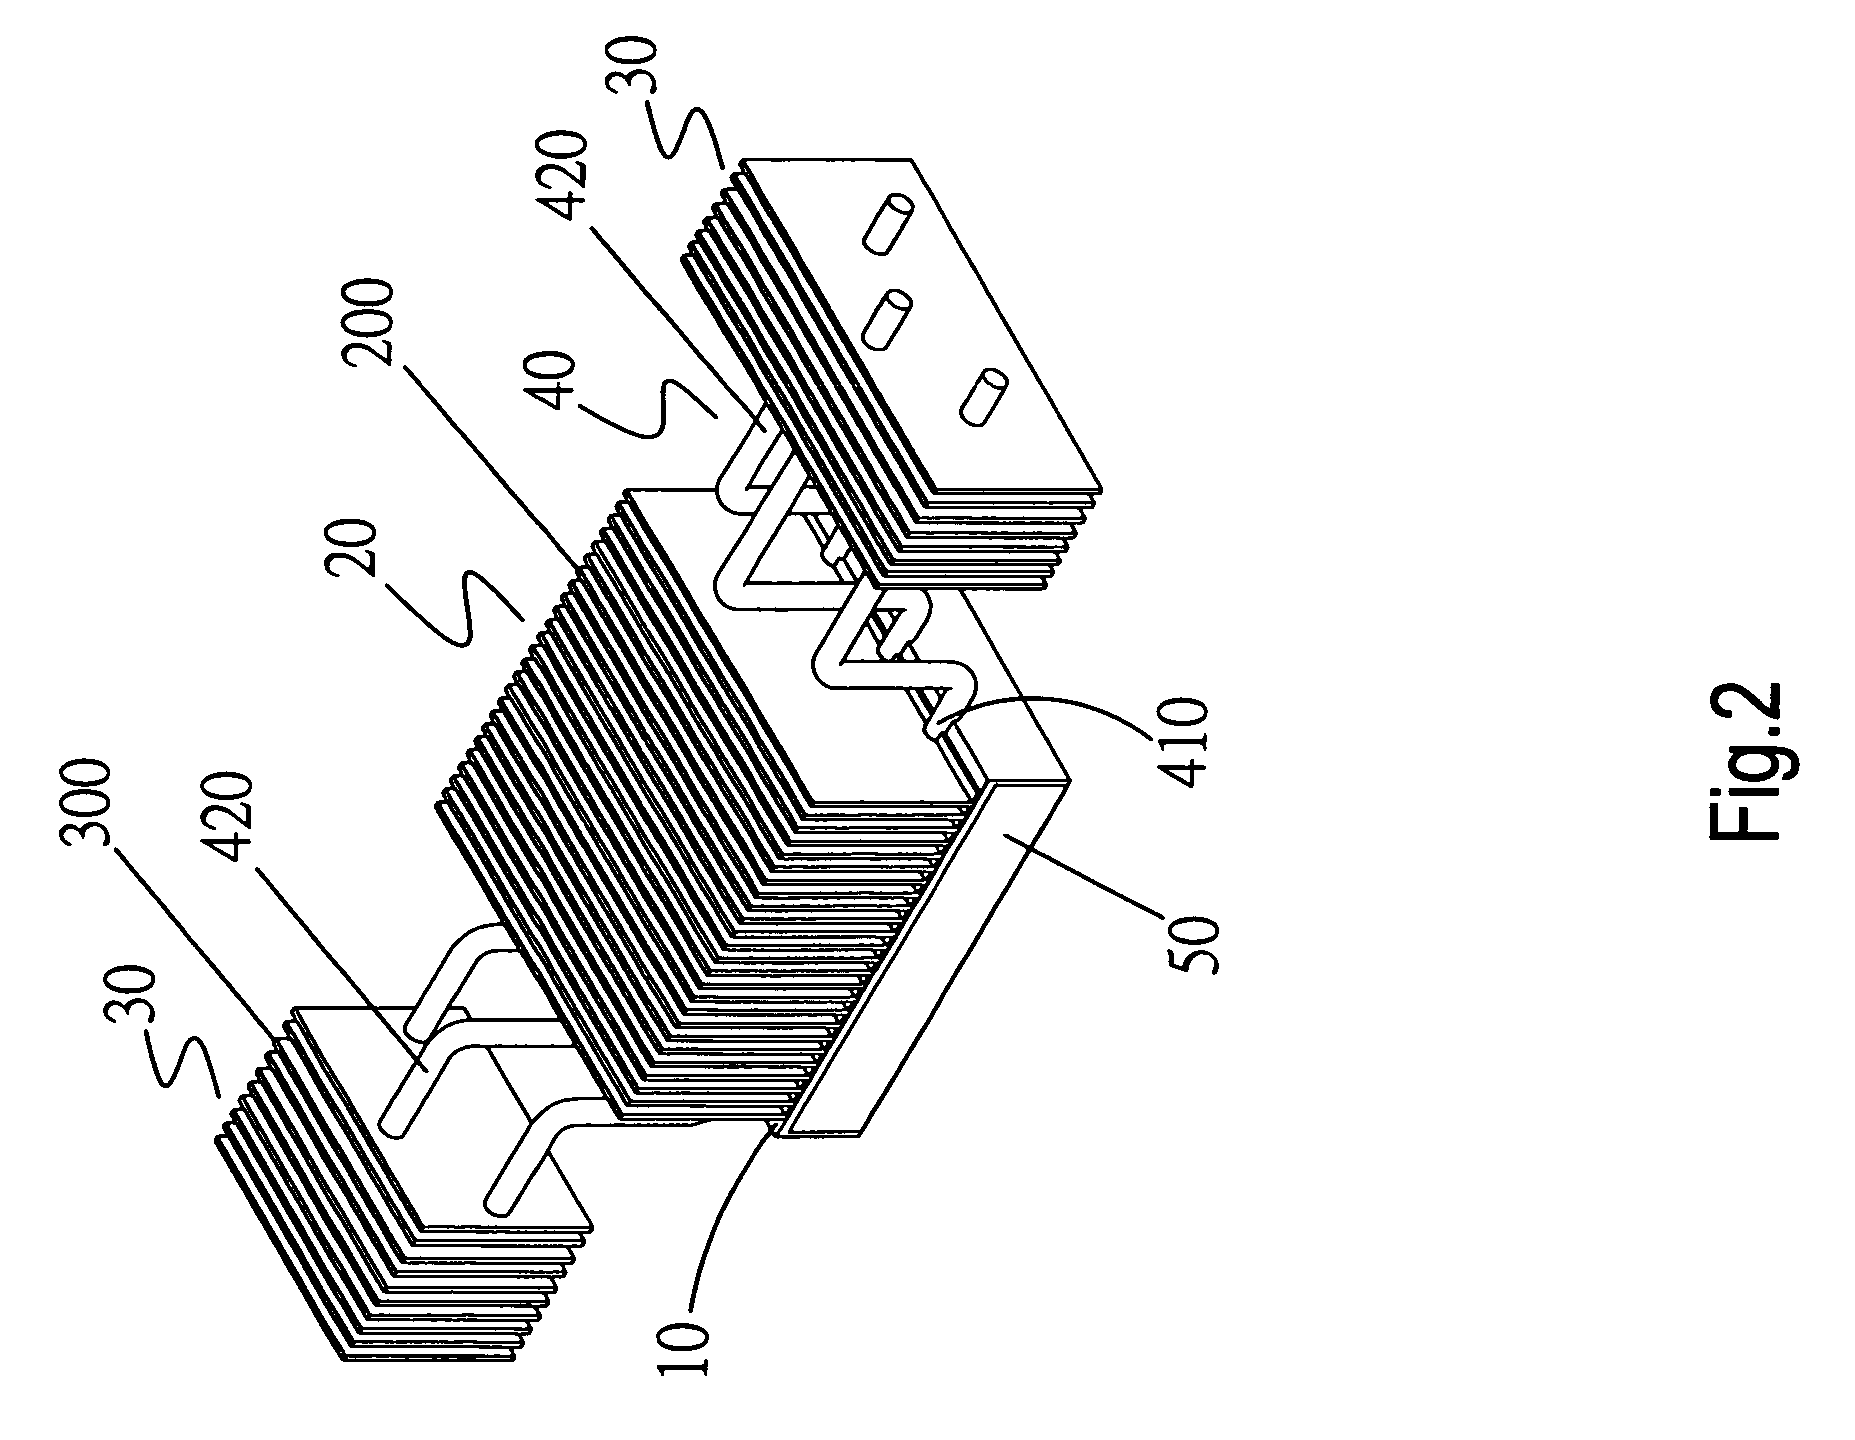 Thermal module for light-emitting diode